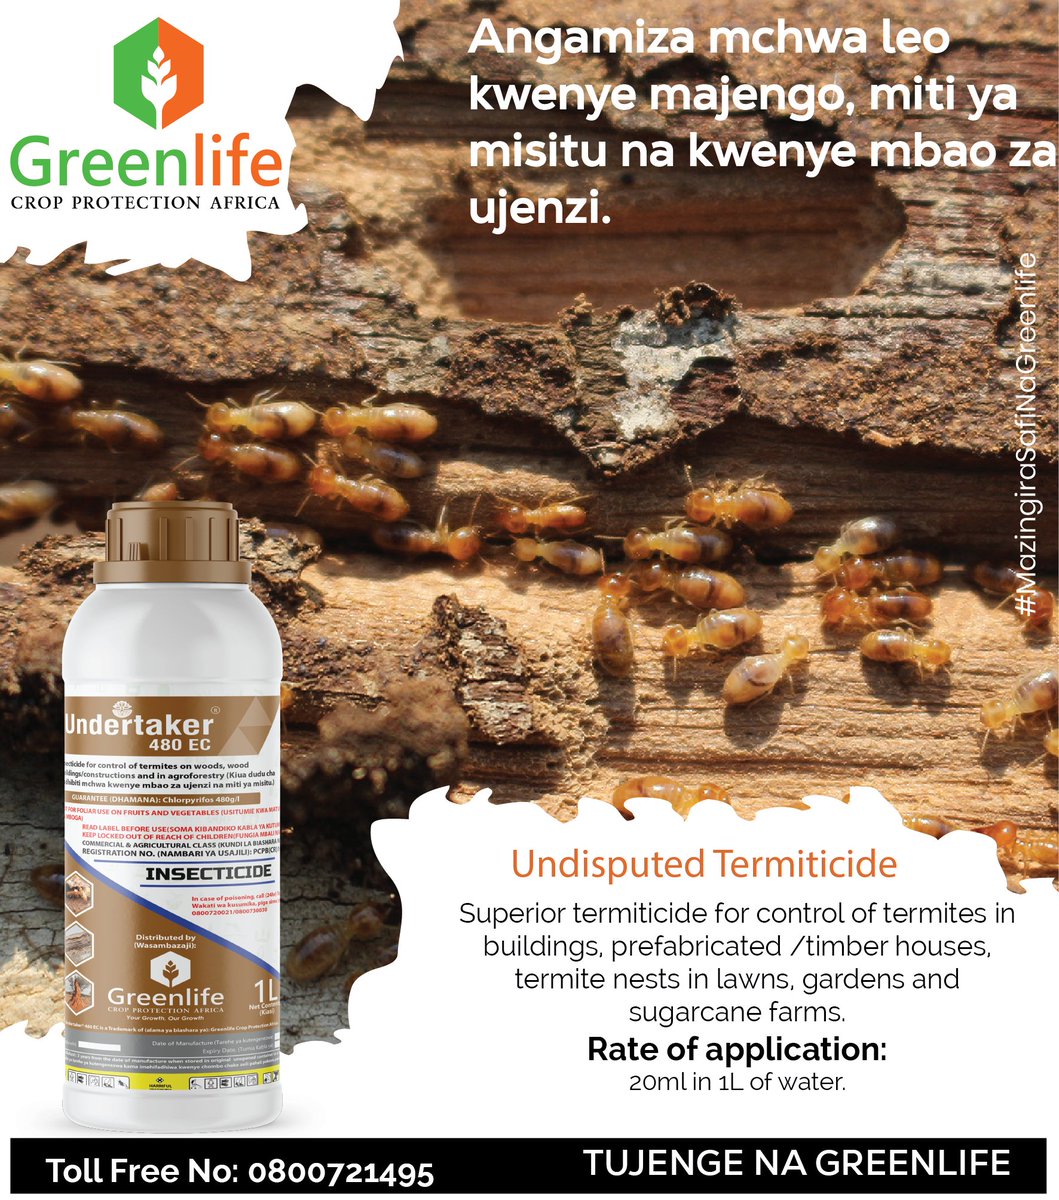 Will My Home Insurance Cover Termite Damage? UNDERTAKER 480 EC is the INSURANCE that you need. Apply at the rate of 20ml in 1L of water for 100% protection. Call us free at 0800721495 to purchase #MazingiraSafiNaGreenlife #YourGrowthOurGrowth